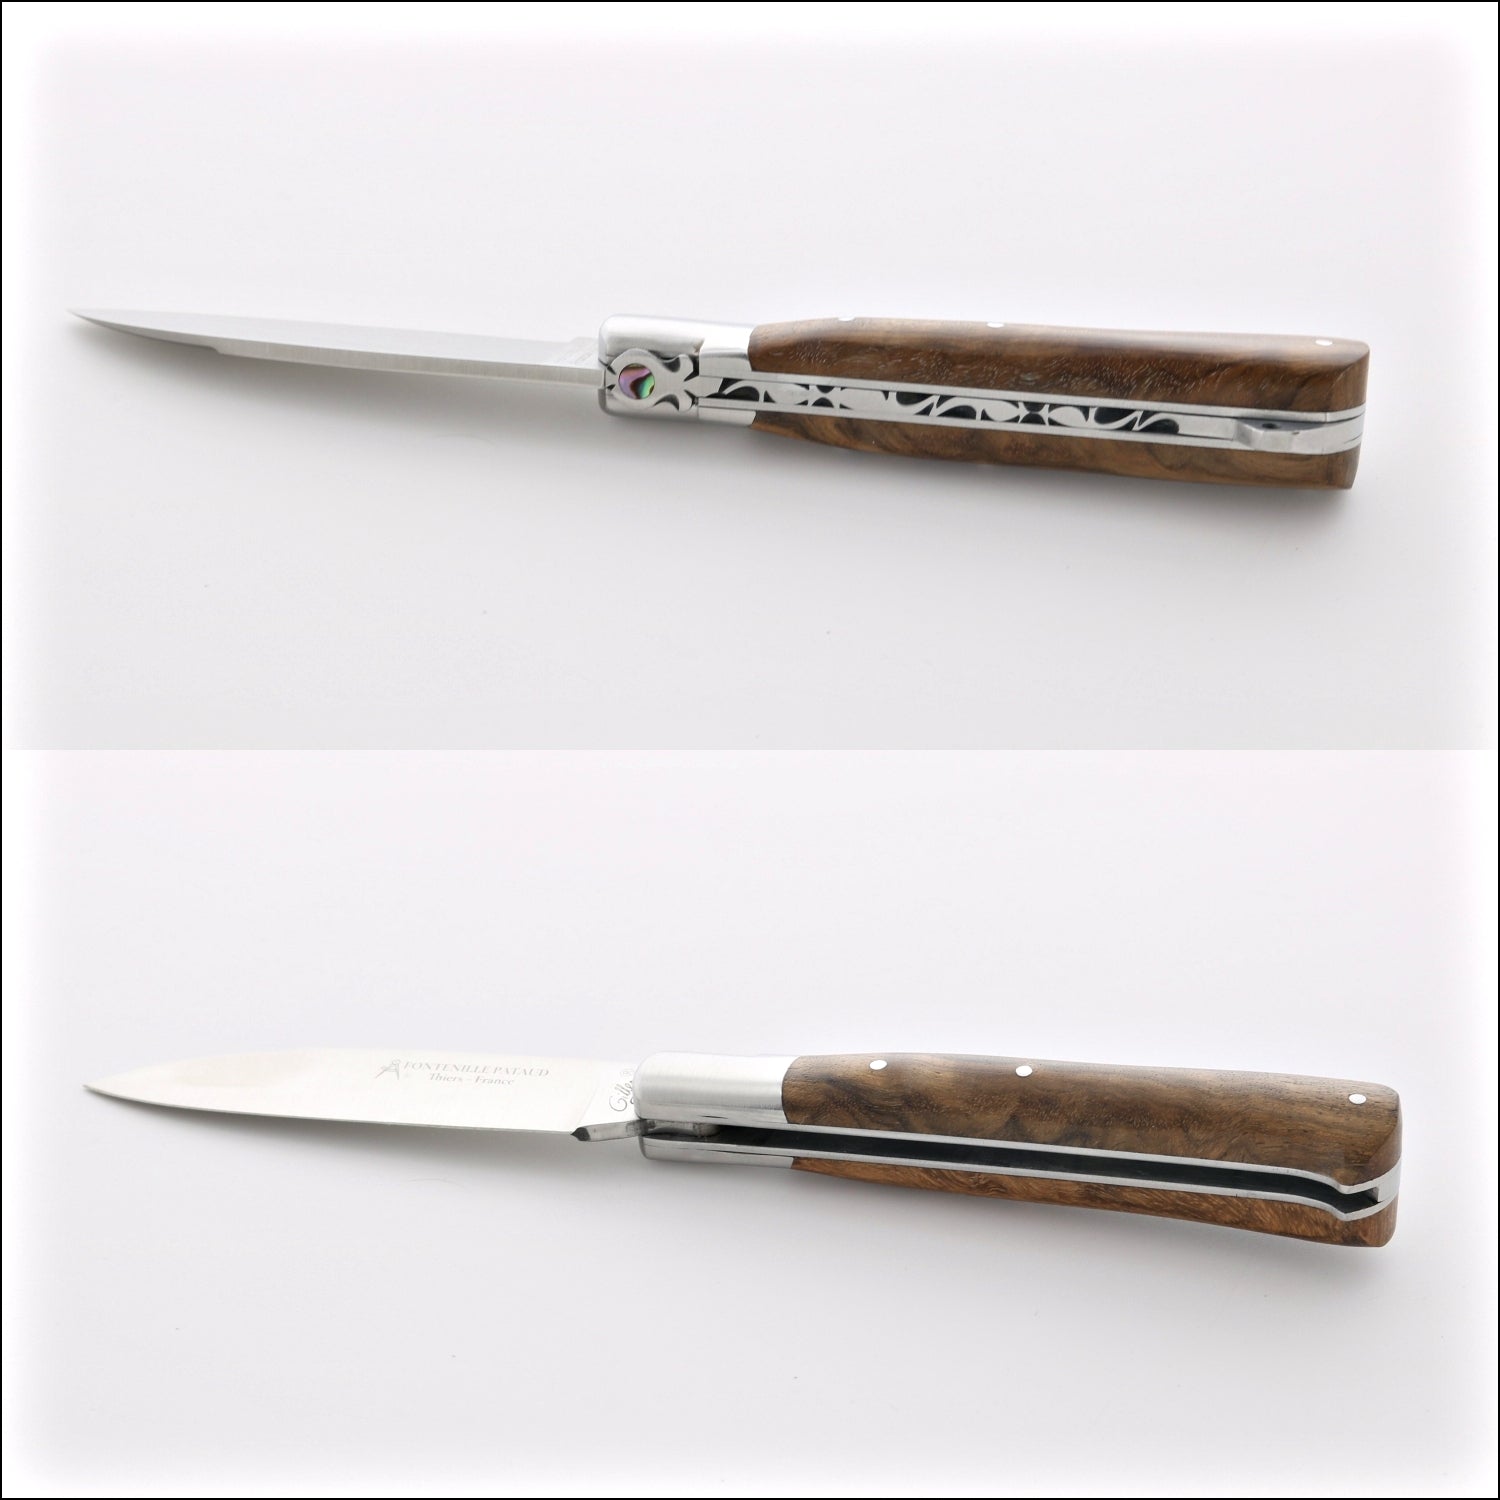 5 Coqs Pocket Knife - Ram Horn & Mother of Pearl Inlay - Laguiole Imports